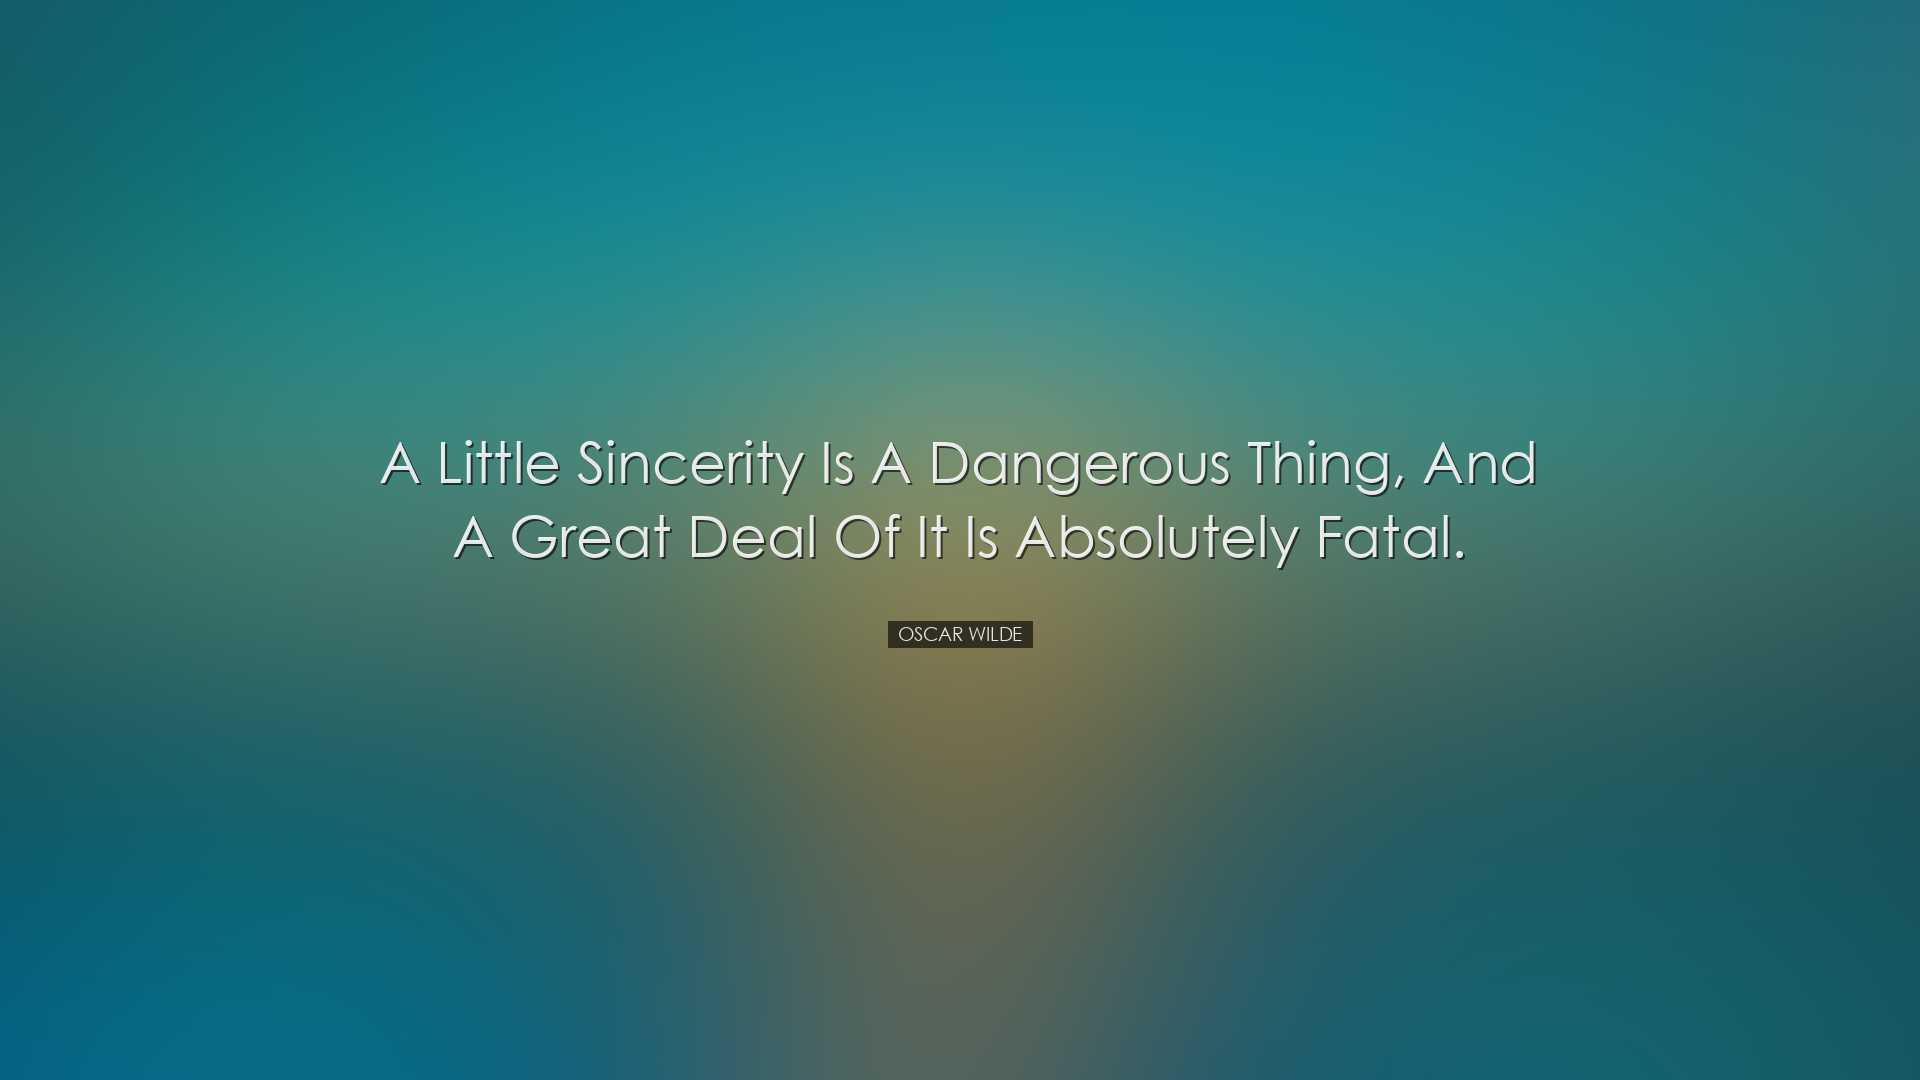 A little sincerity is a dangerous thing, and a great deal of it is